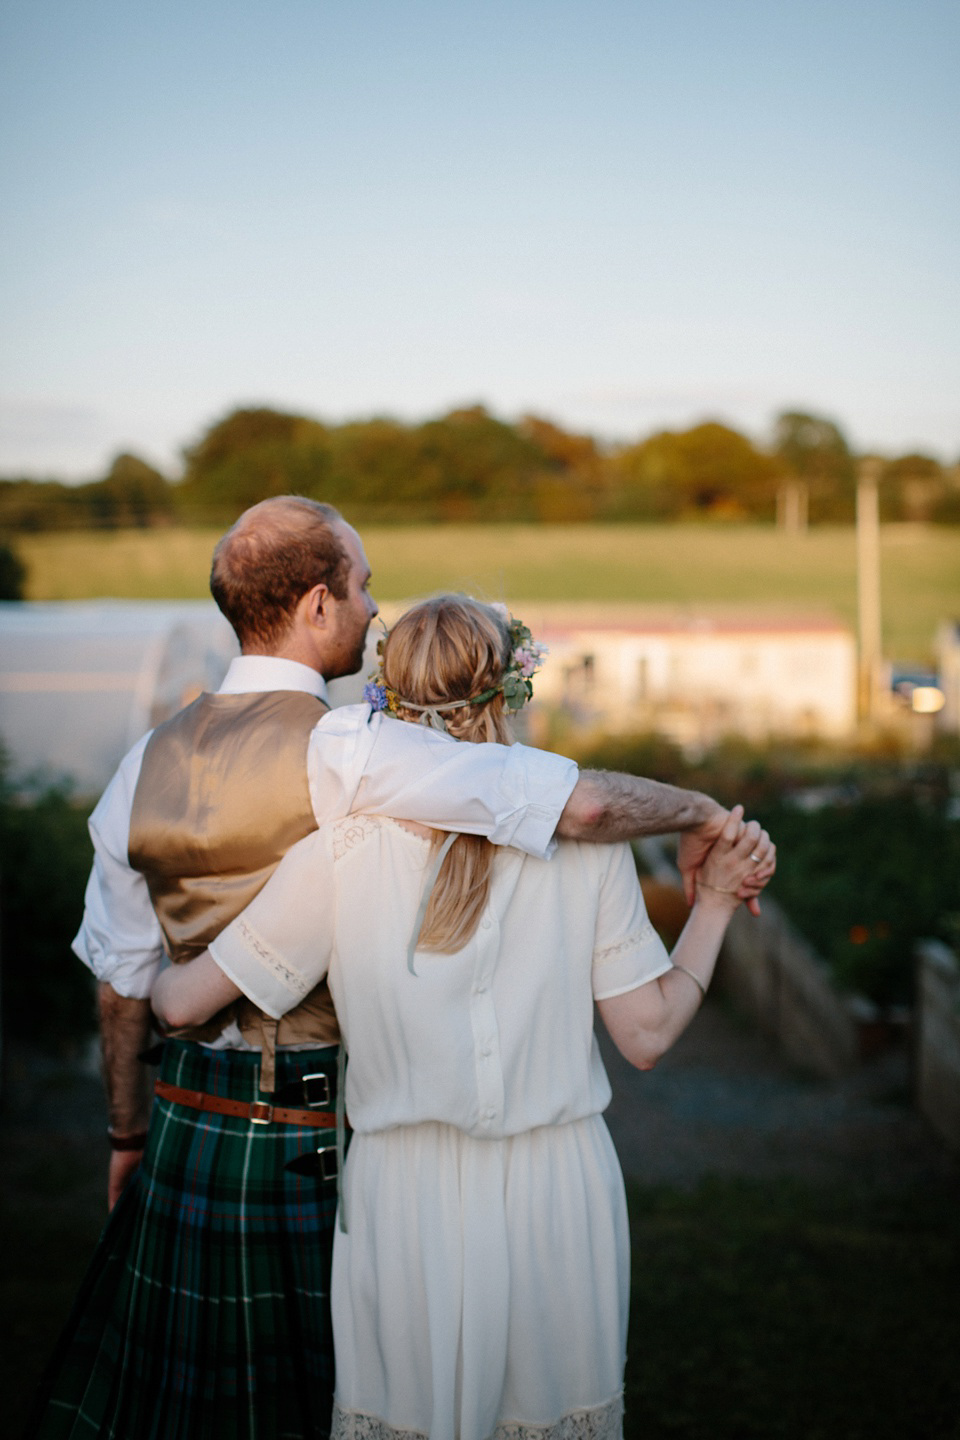 A Humanist handfasting outdoor ceremony at The Secret Herb Garden, just outside Edinburgh. The bride wore 'Minna'. Photography by Caro Weiss.